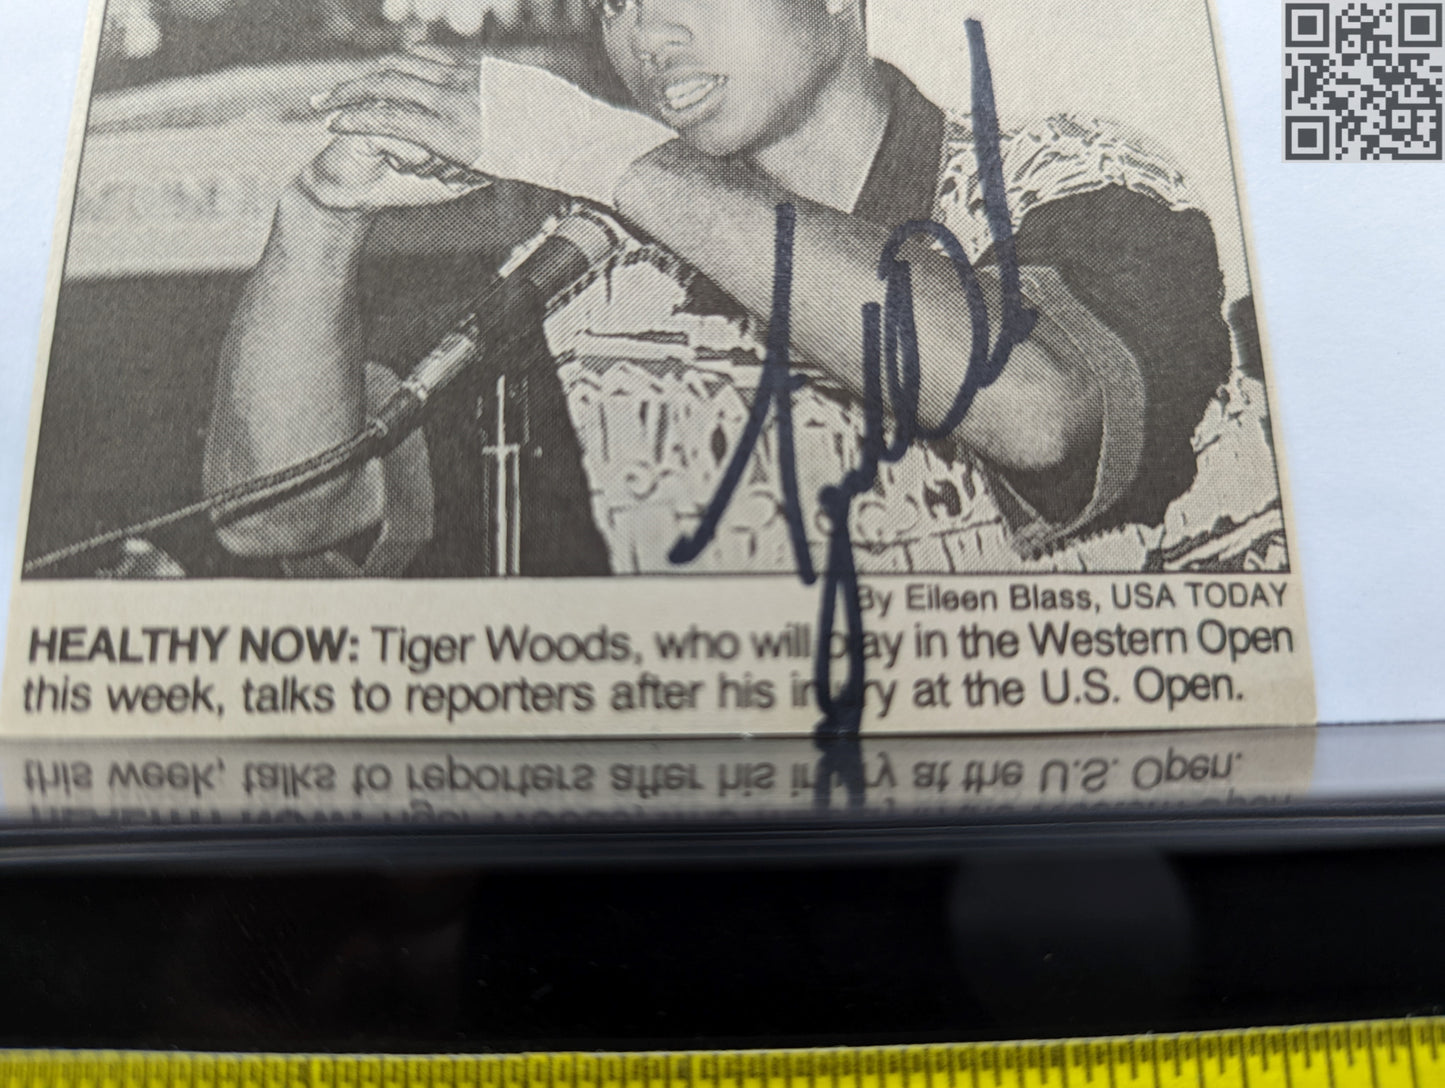 1995 Tiger Woods Signed Newspaper Clipping pre WGA Motorola Western Open Amateur